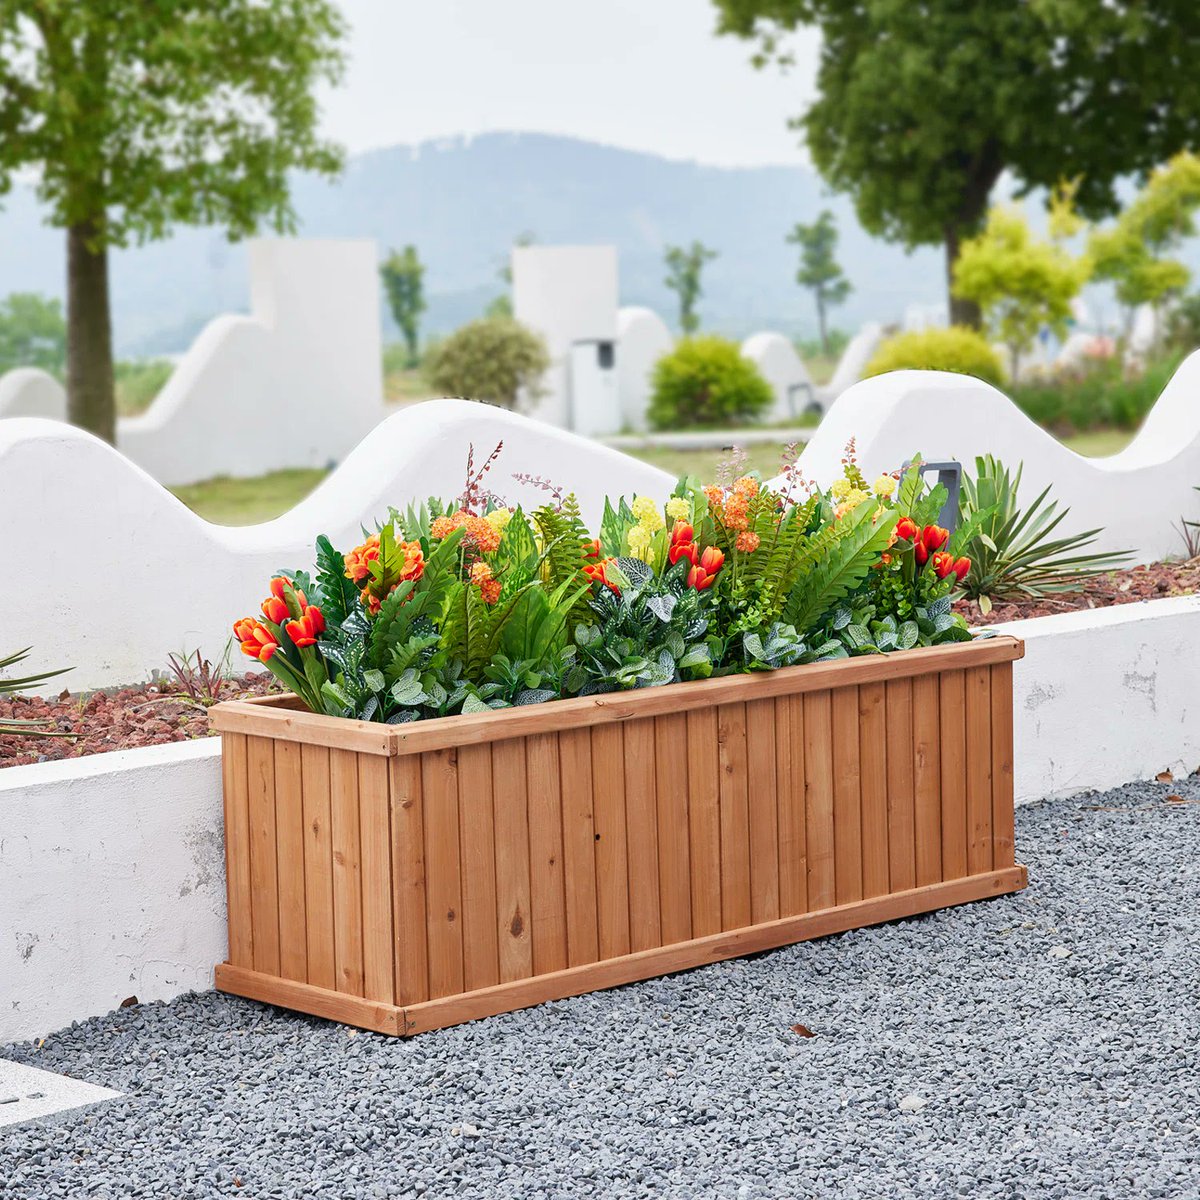 Barros Cedar Wood Outdoor Raised Garden Bed Planter Box by Three Posts™. This sleek planter box brings classic style to your porch, patio, or deck. It’s ideal for flowers, or for your favorite ingredients for summer salads or herbs for cooking. shopstyle.it/l/ca276